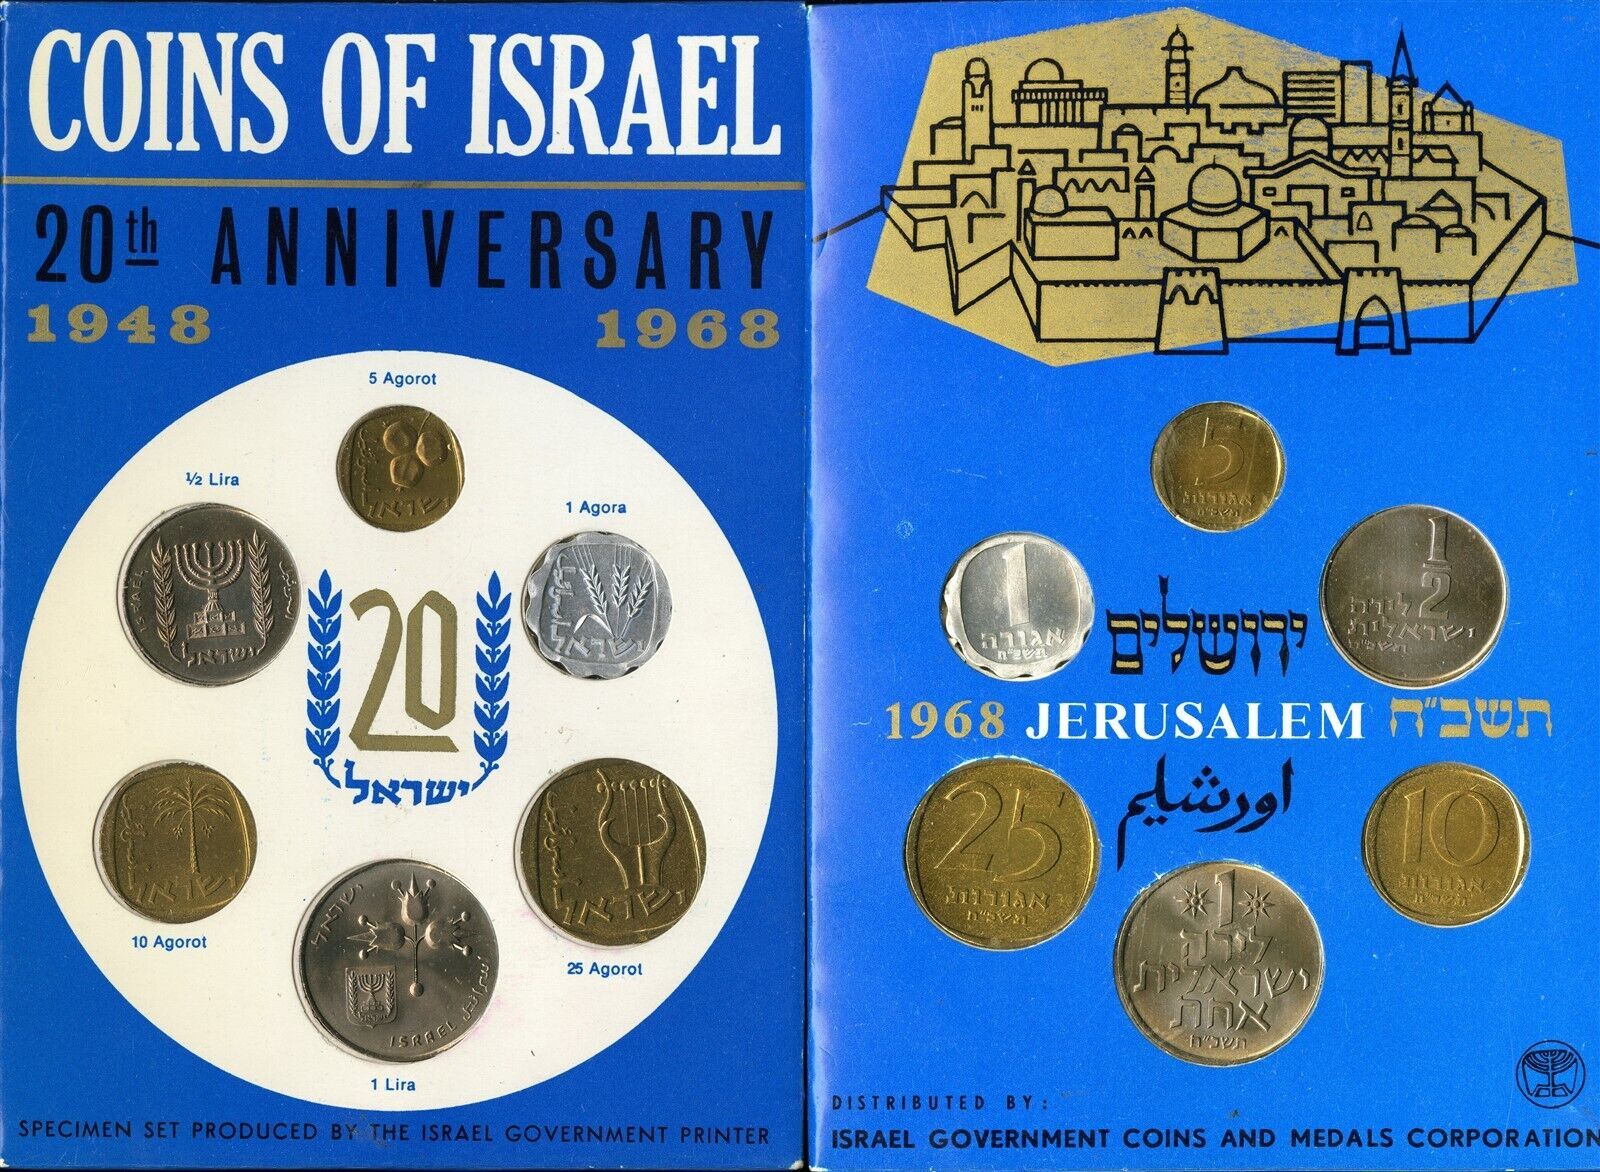 COINS OF ISRAEL 1968 6 COIN SET 20TH ANNIVERSARY 1948 - 1968 OF FOUNDING NEW  - $9.95